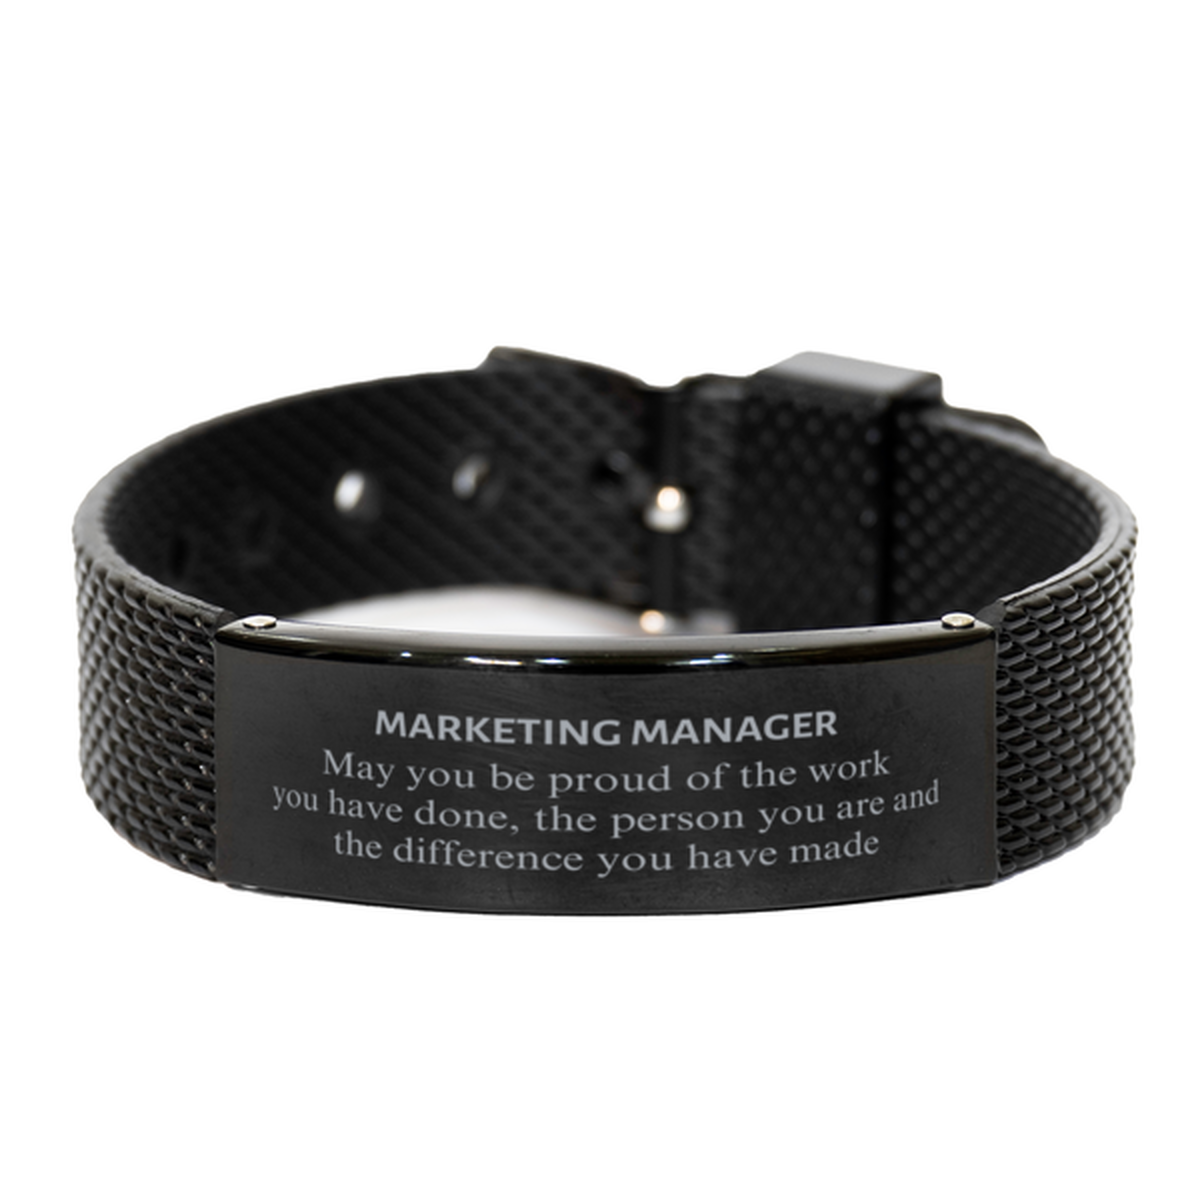 Marketing Manager May you be proud of the work you have done, Retirement Marketing Manager Black Shark Mesh Bracelet for Colleague Appreciation Gifts Amazing for Marketing Manager